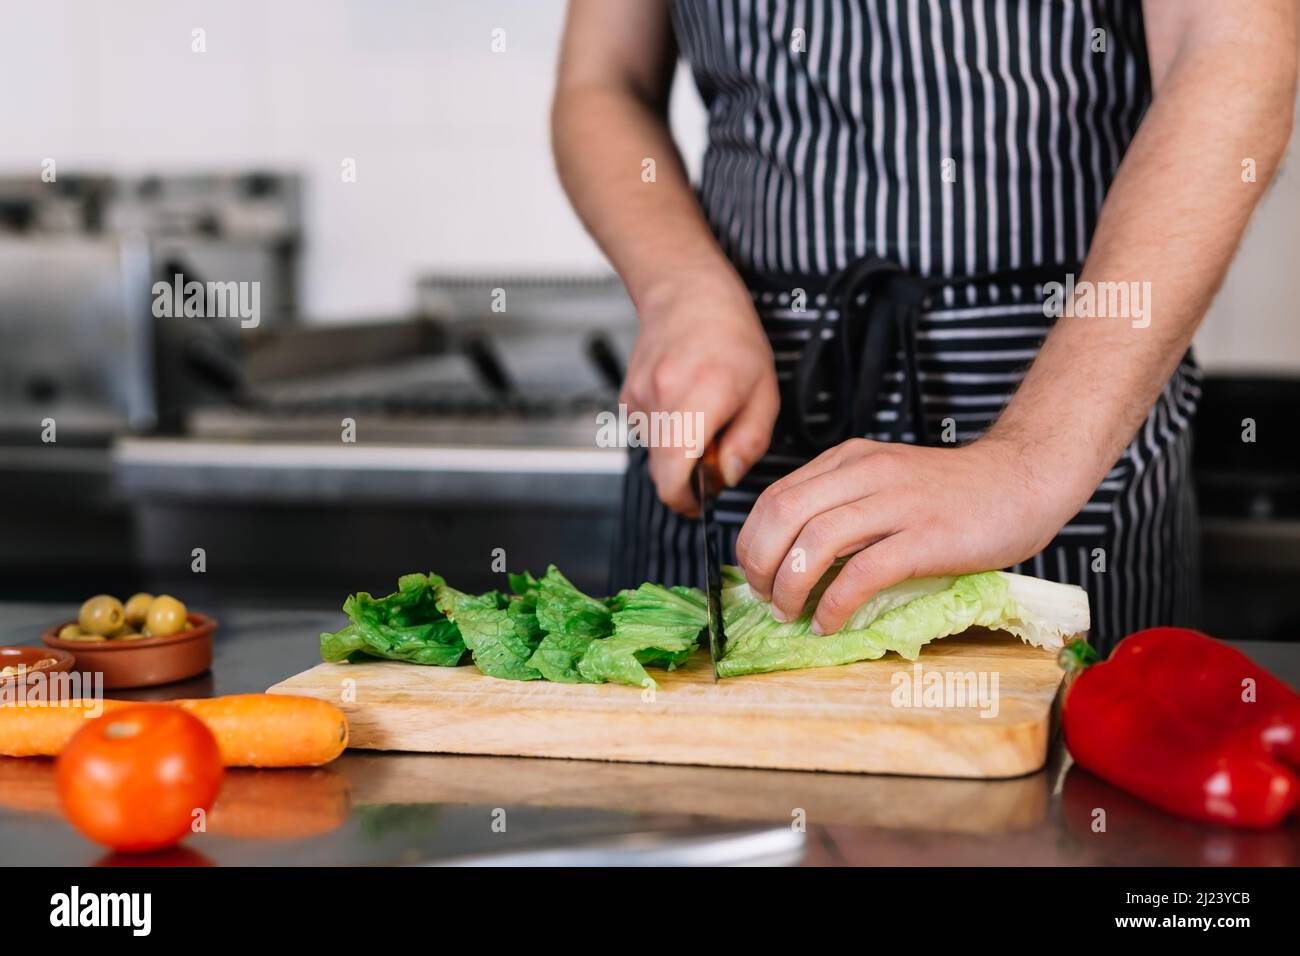 detail of the hands of a young male chief, cutting food in a professional kitchen Stock Photo